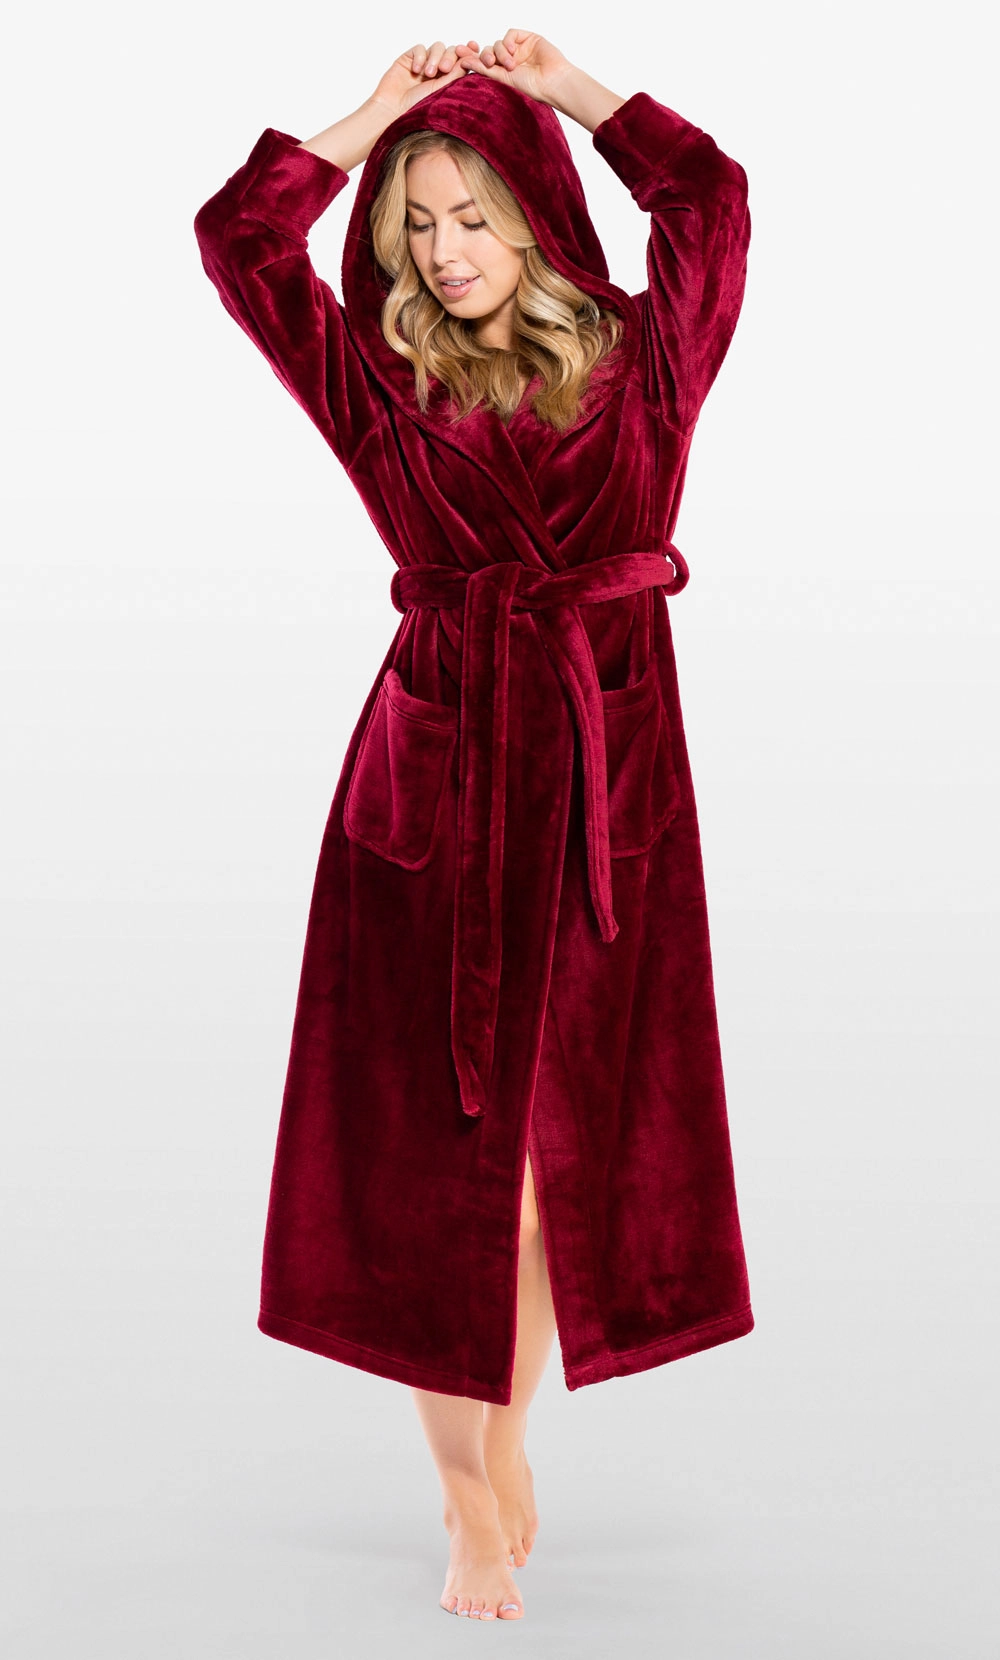 Luxury Bathrobes :: Plush Robes :: Super Soft Burgundy Plush Hooded Women's  Robe - Wholesale bathrobes, Spa robes, Kids robes, Cotton robes, Spa  Slippers, Wholesale Towels